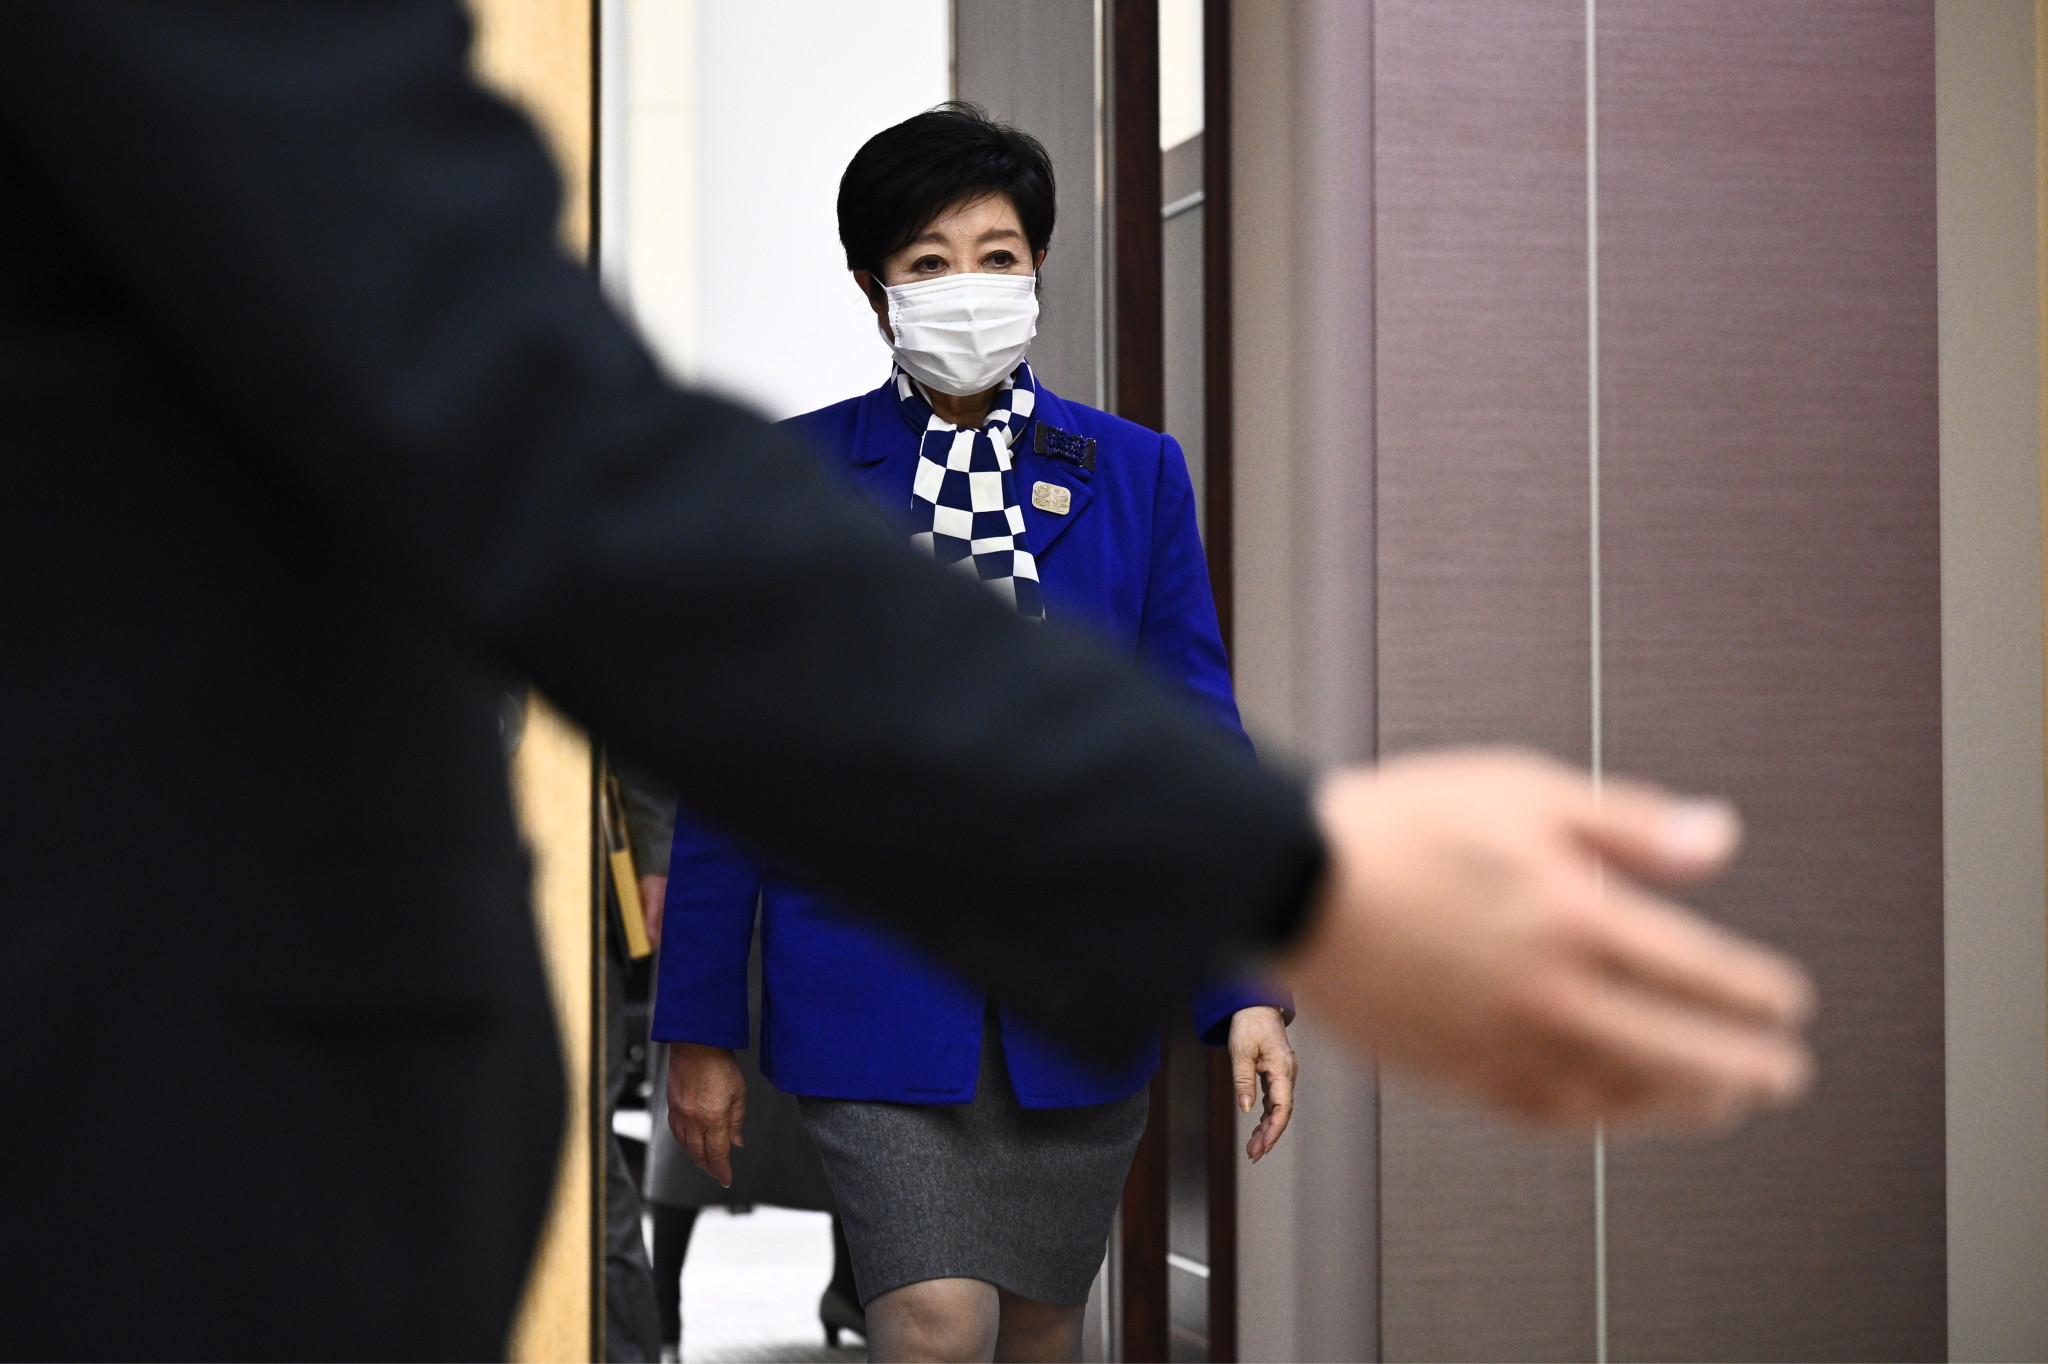 Koike cautious over easing state of emergency despite decline in new coronavirus cases in Tokyo